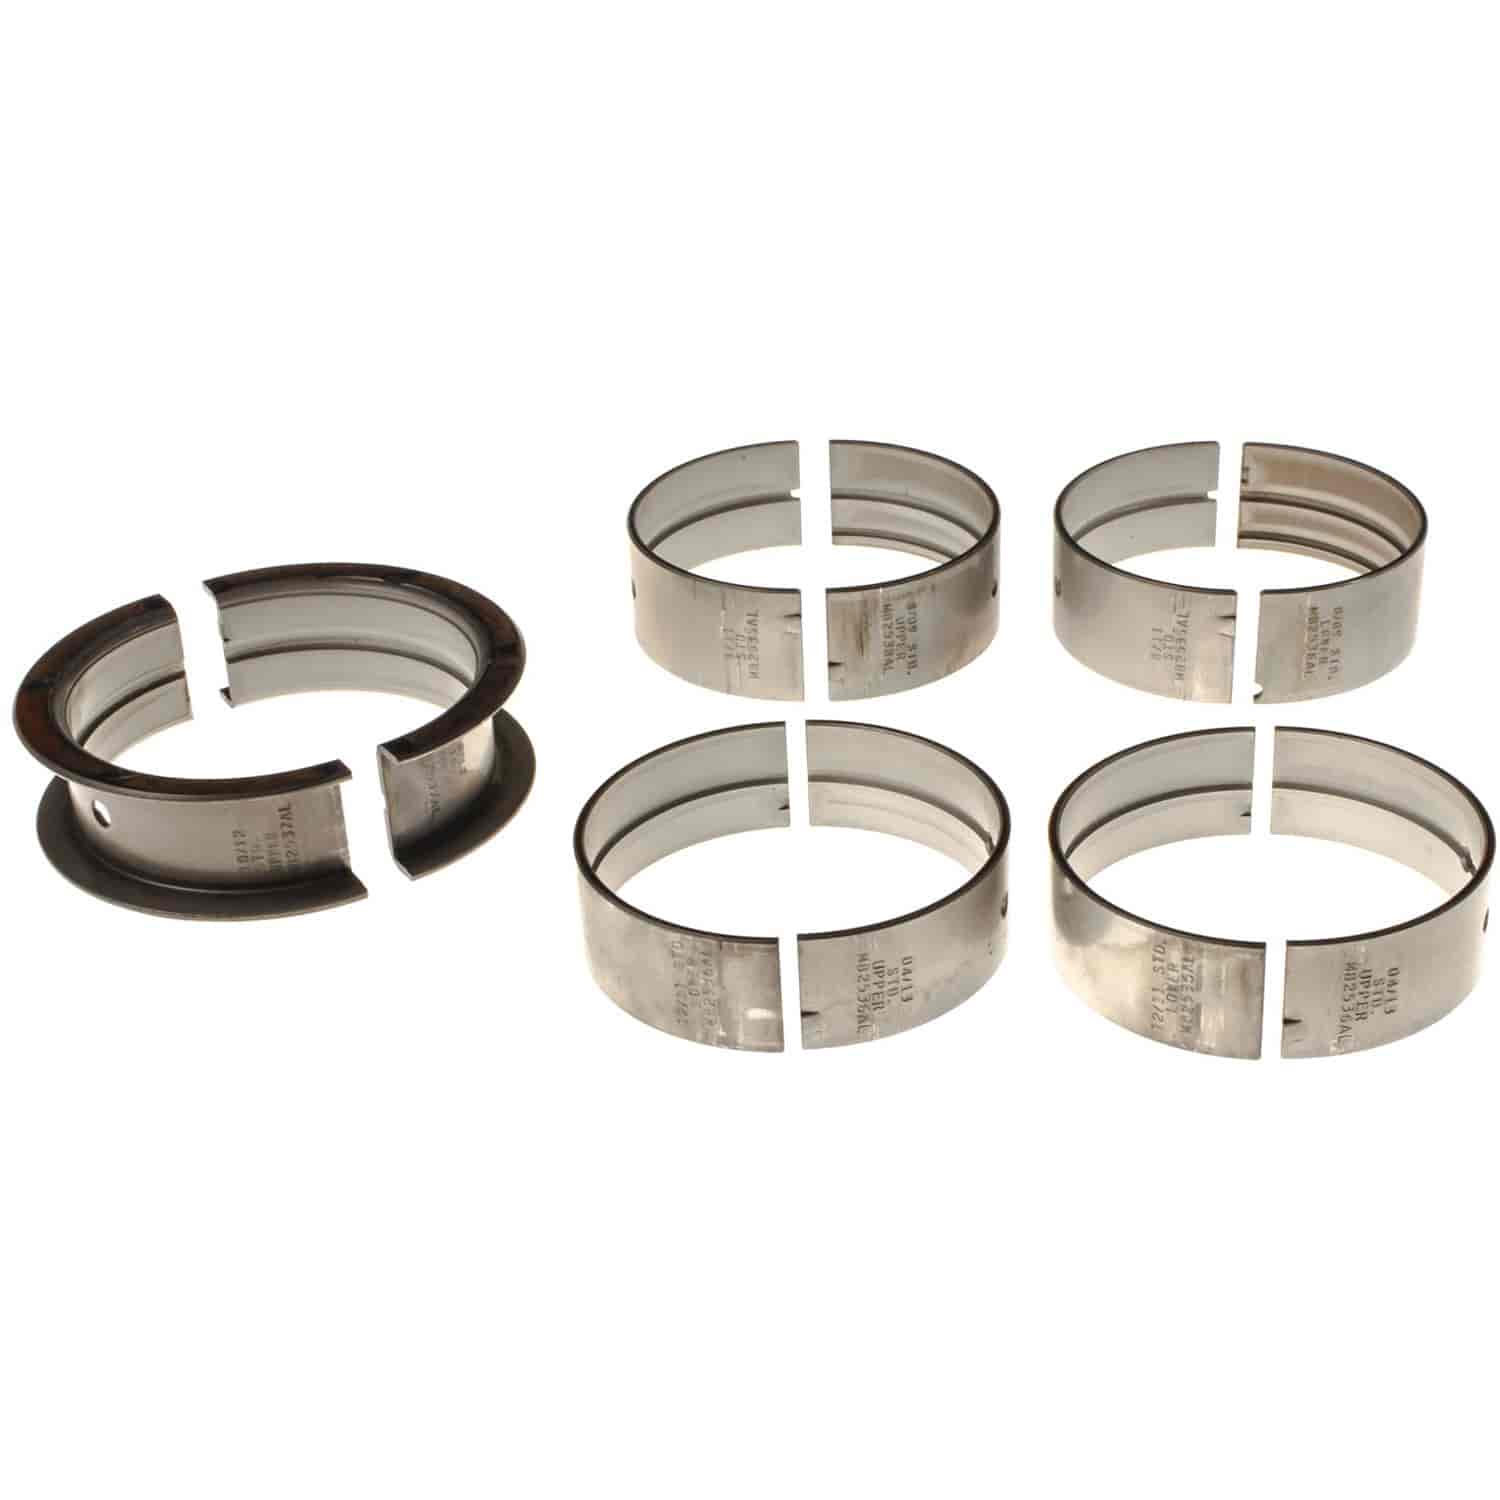 Main Bearing Set for Cadillac 1968-1984 368/425/472/500 with -.010" Undersize